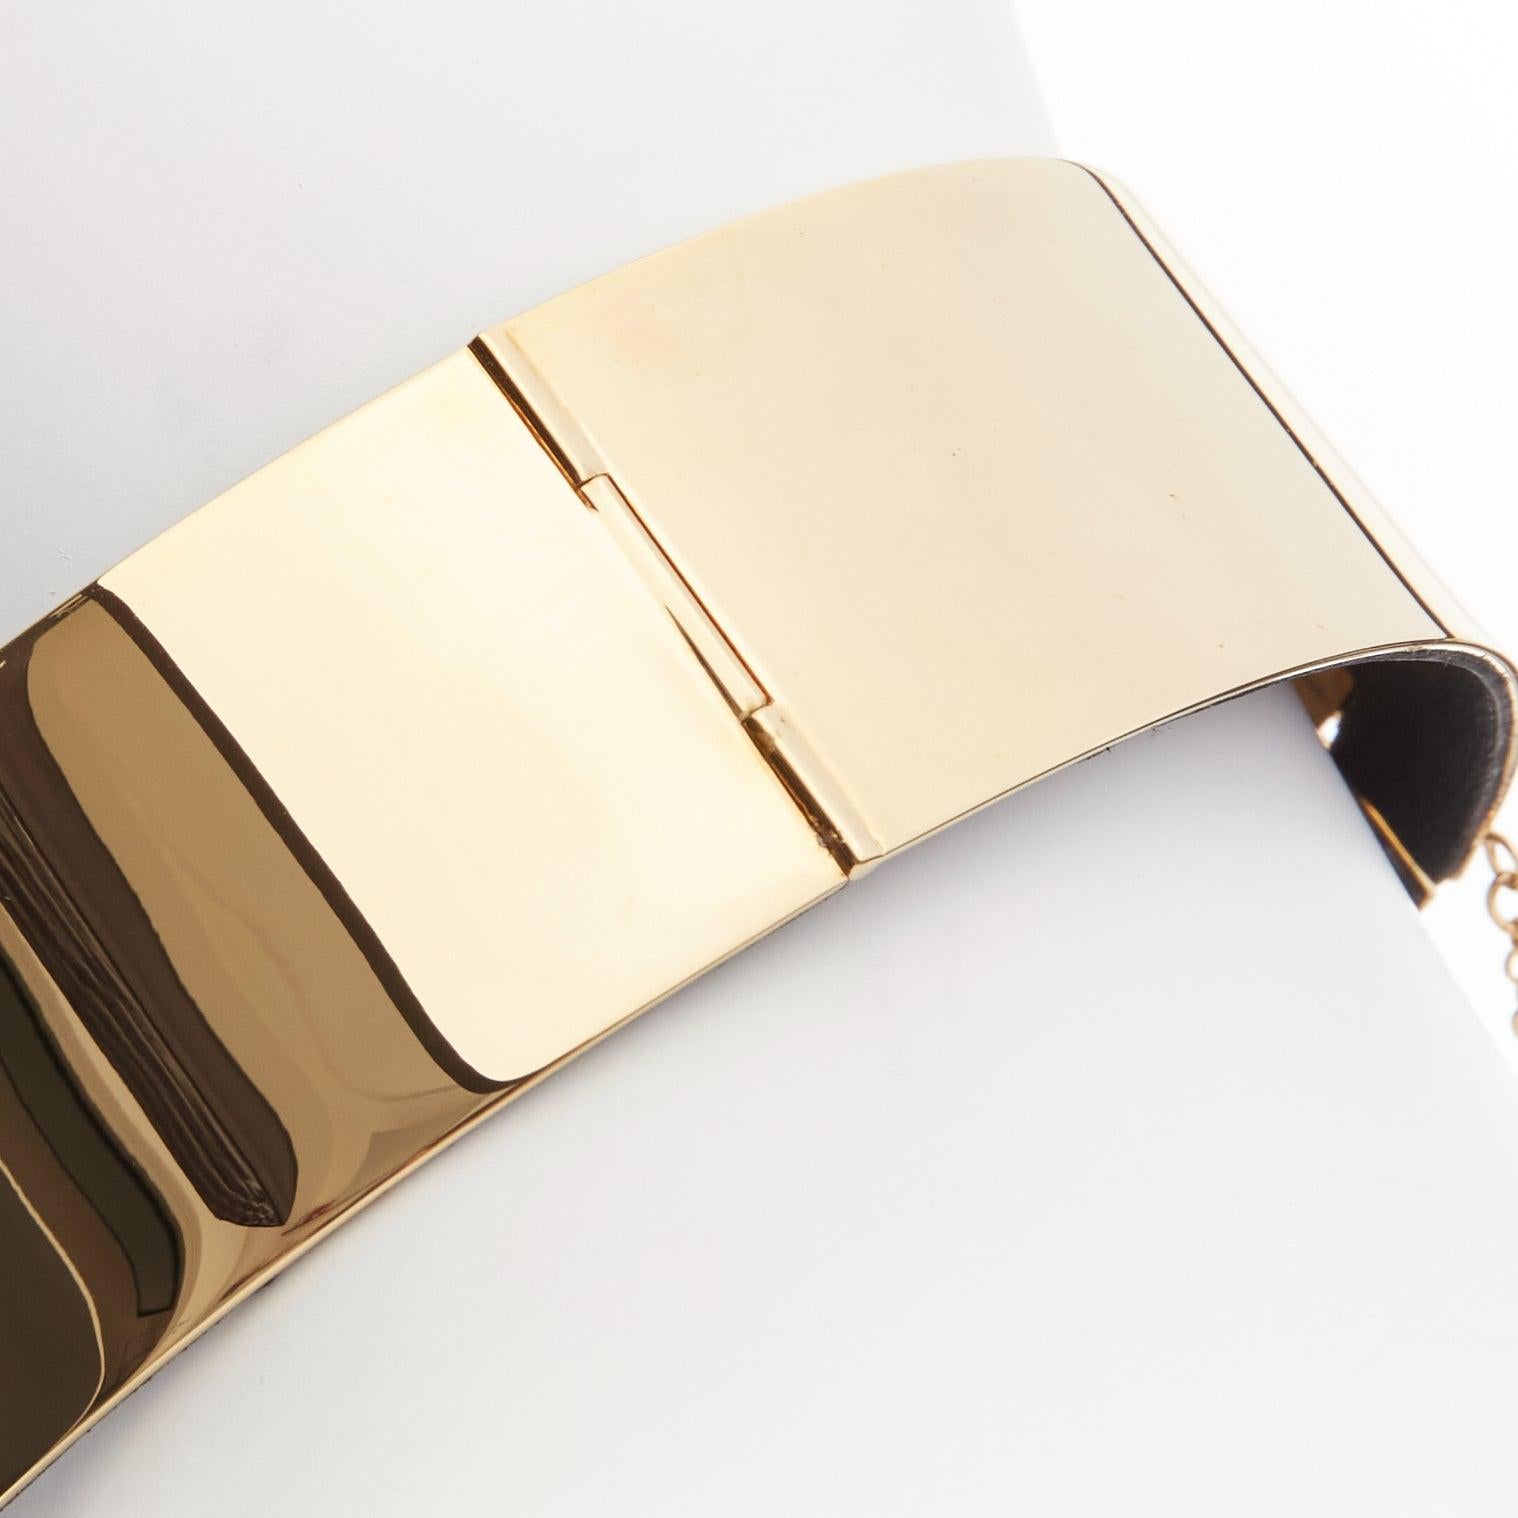 OLD CELINE Phoebe Philo 2011 Runway leather lined metal bar choker necklace For Sale 2